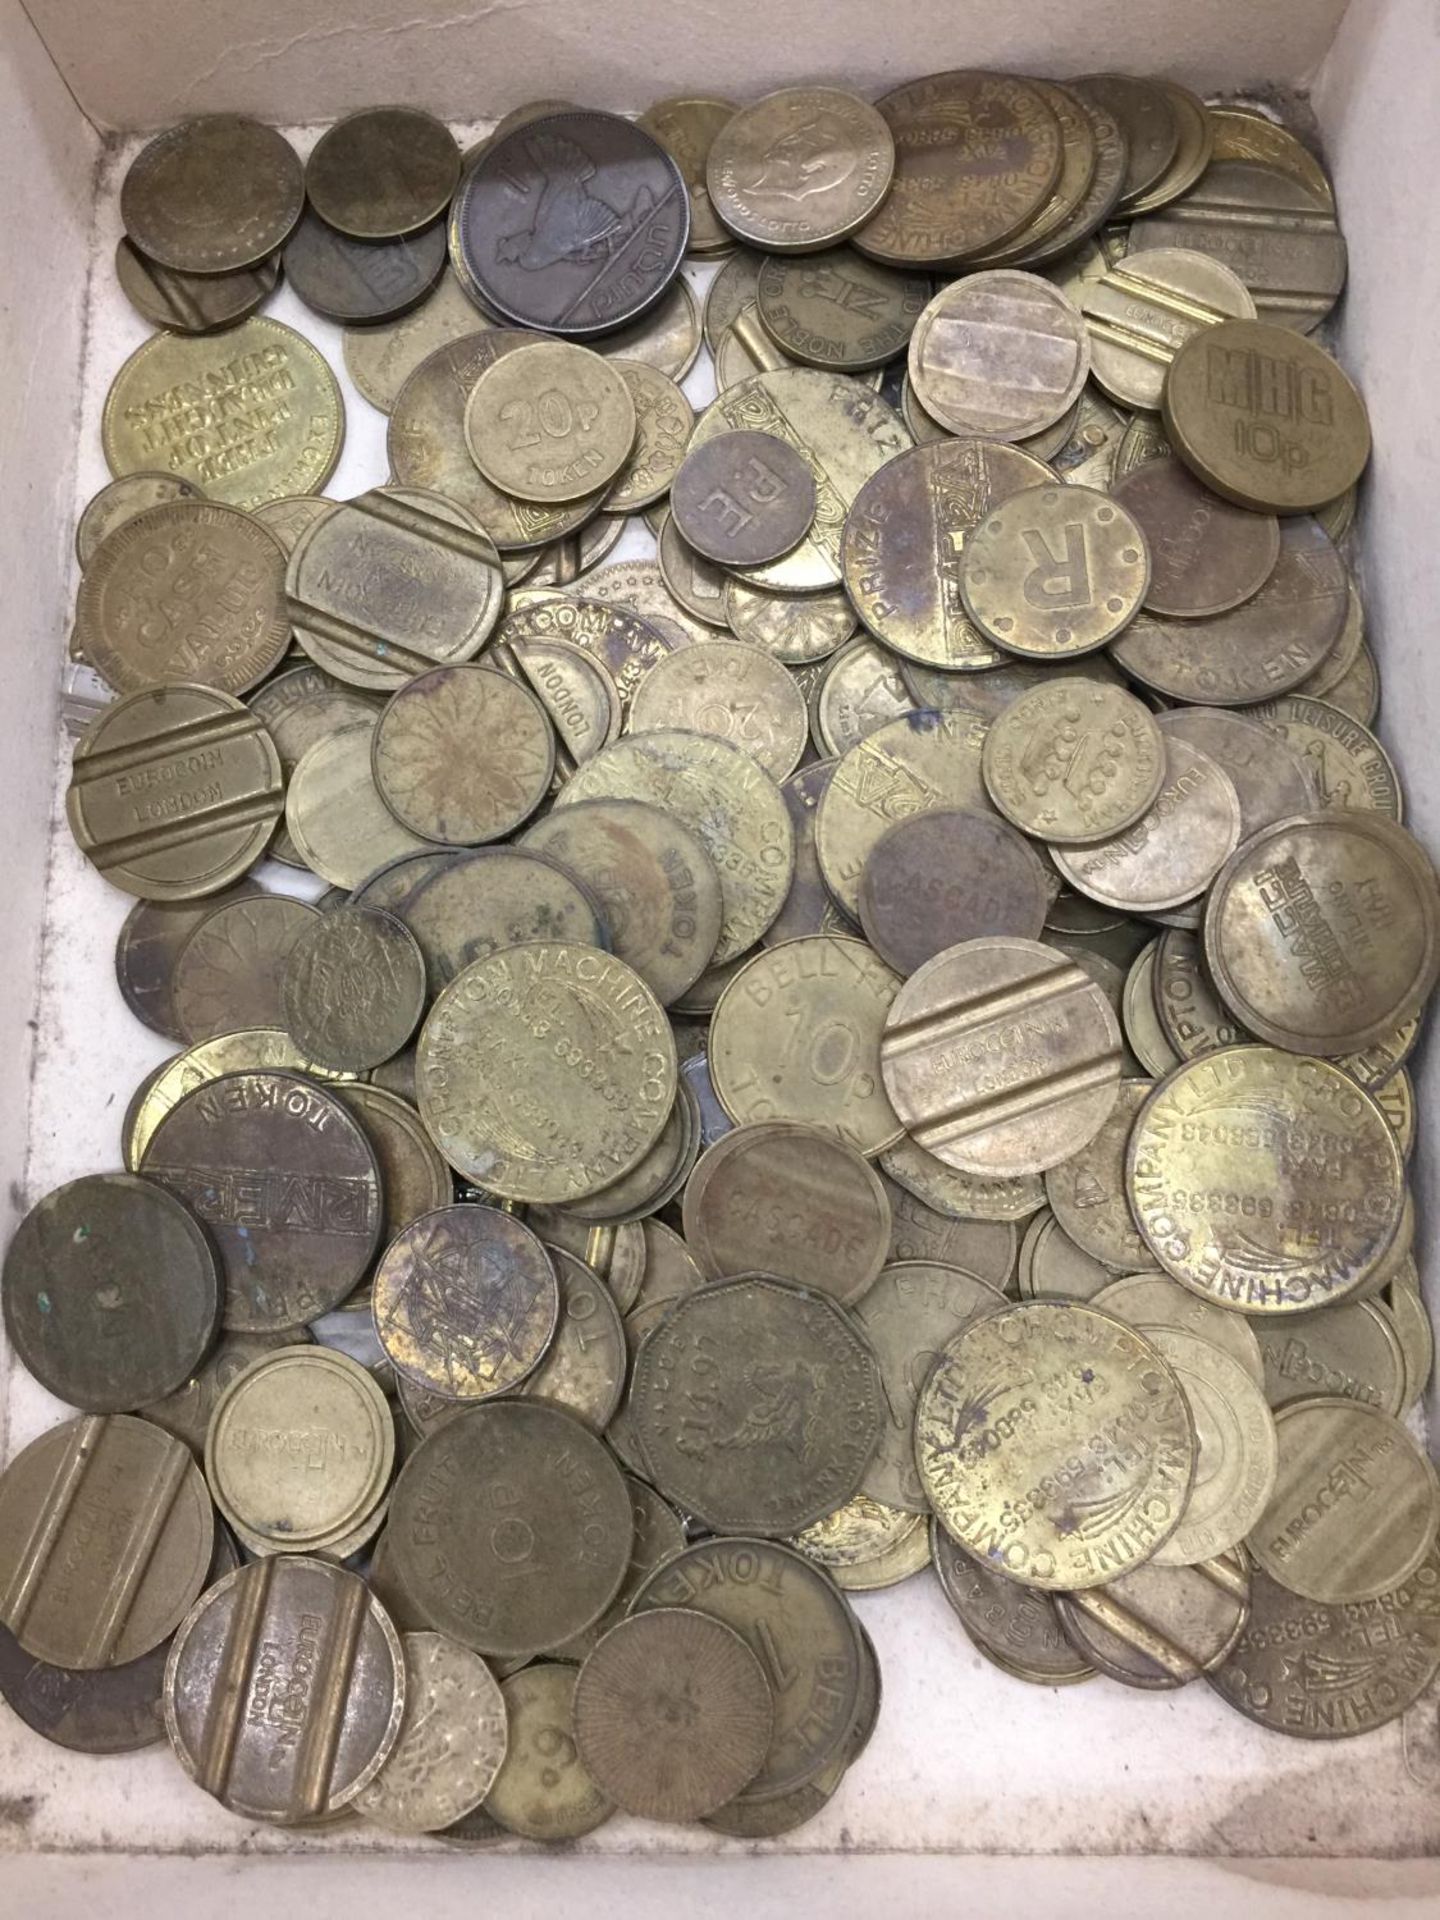 A COLLECTION OF VINTAGE TOKENS, SOME OF WHICH ARE RARE